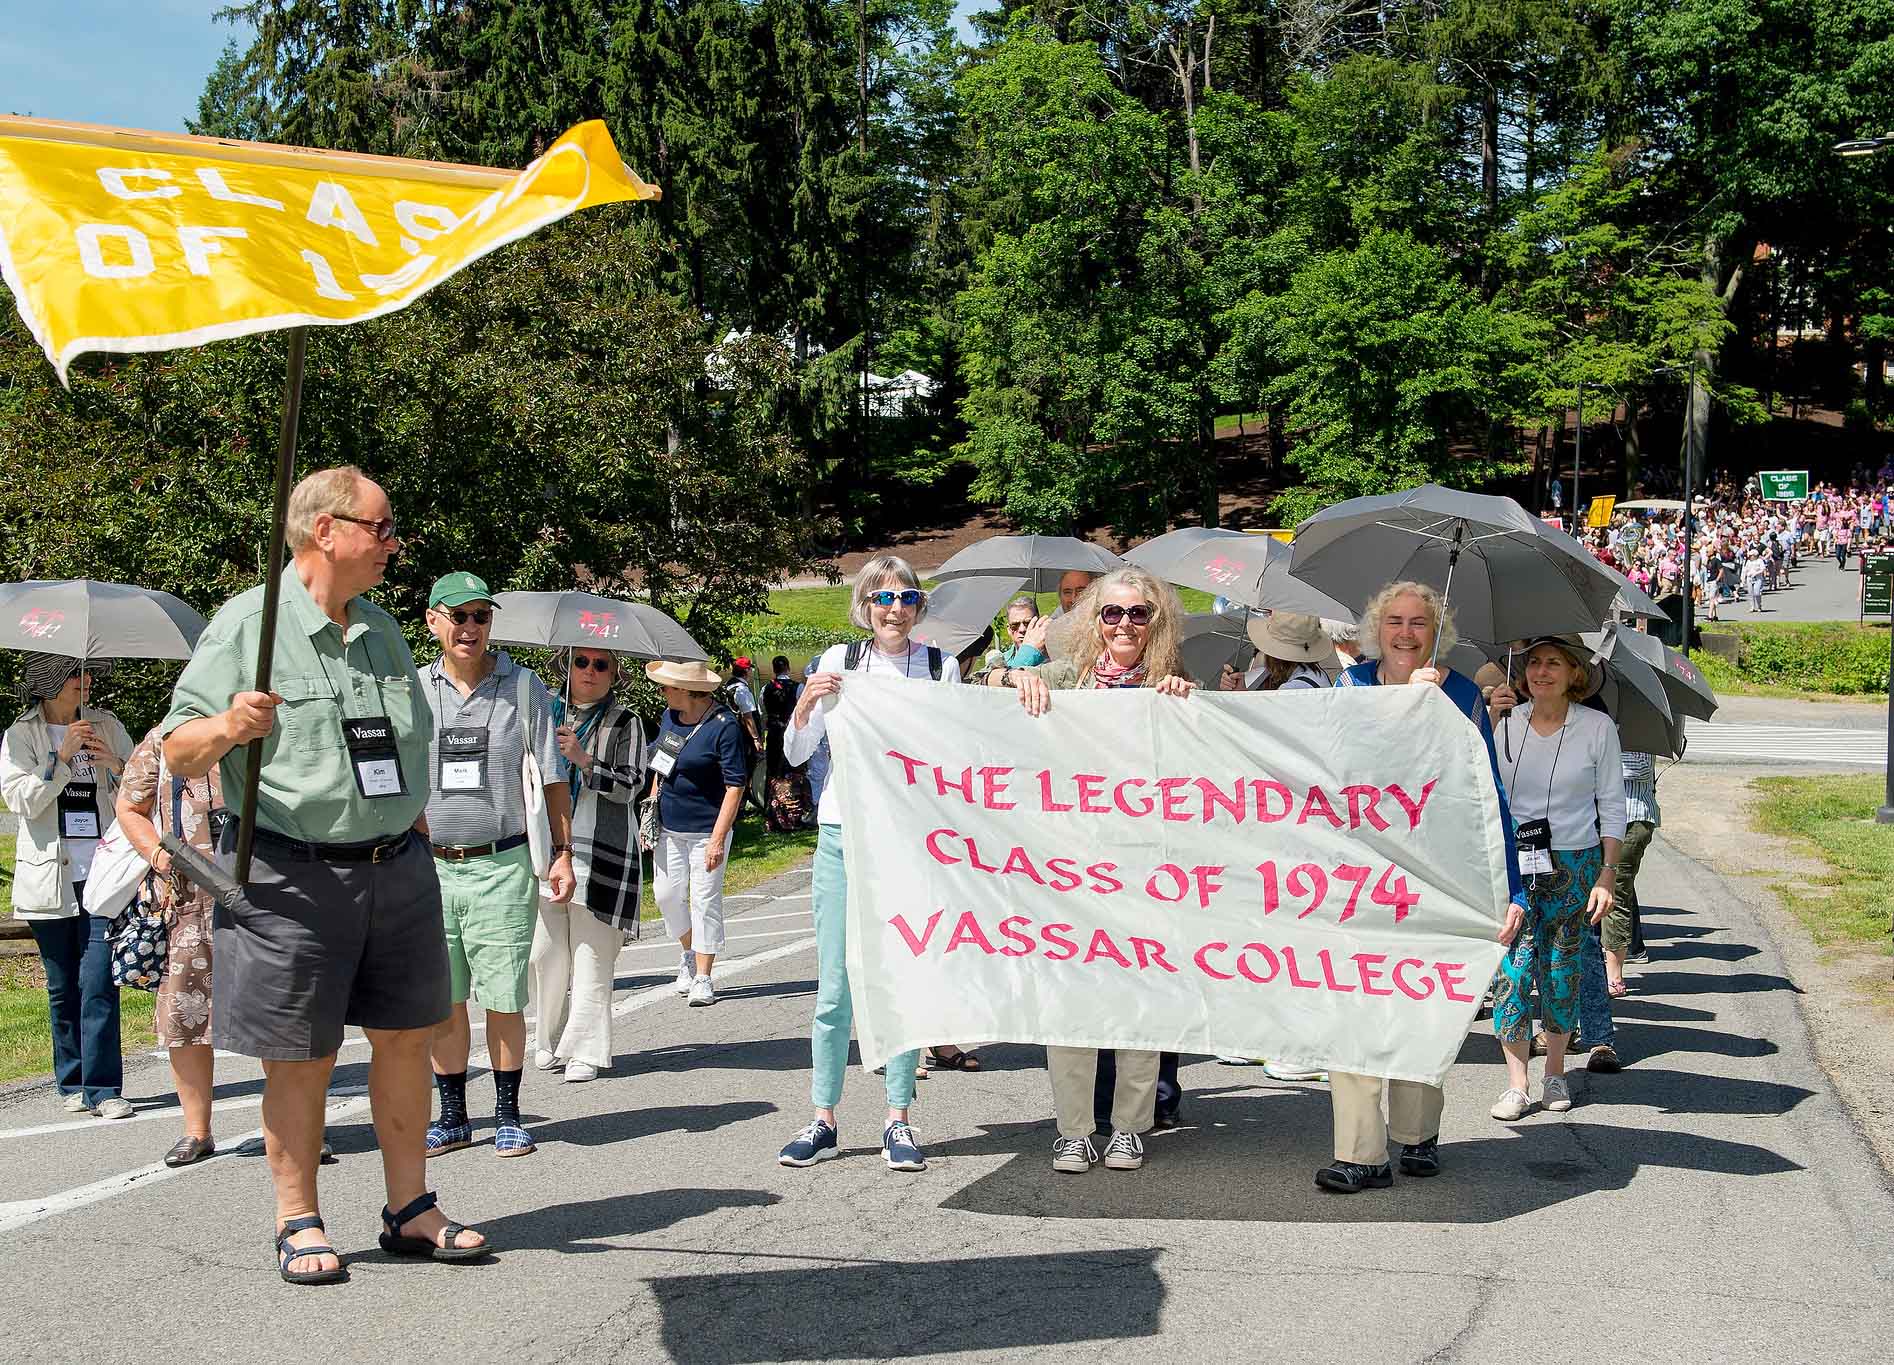 People walking in a group, with some people holding a banner reading The Legendary Class of 1974 Vassar College.